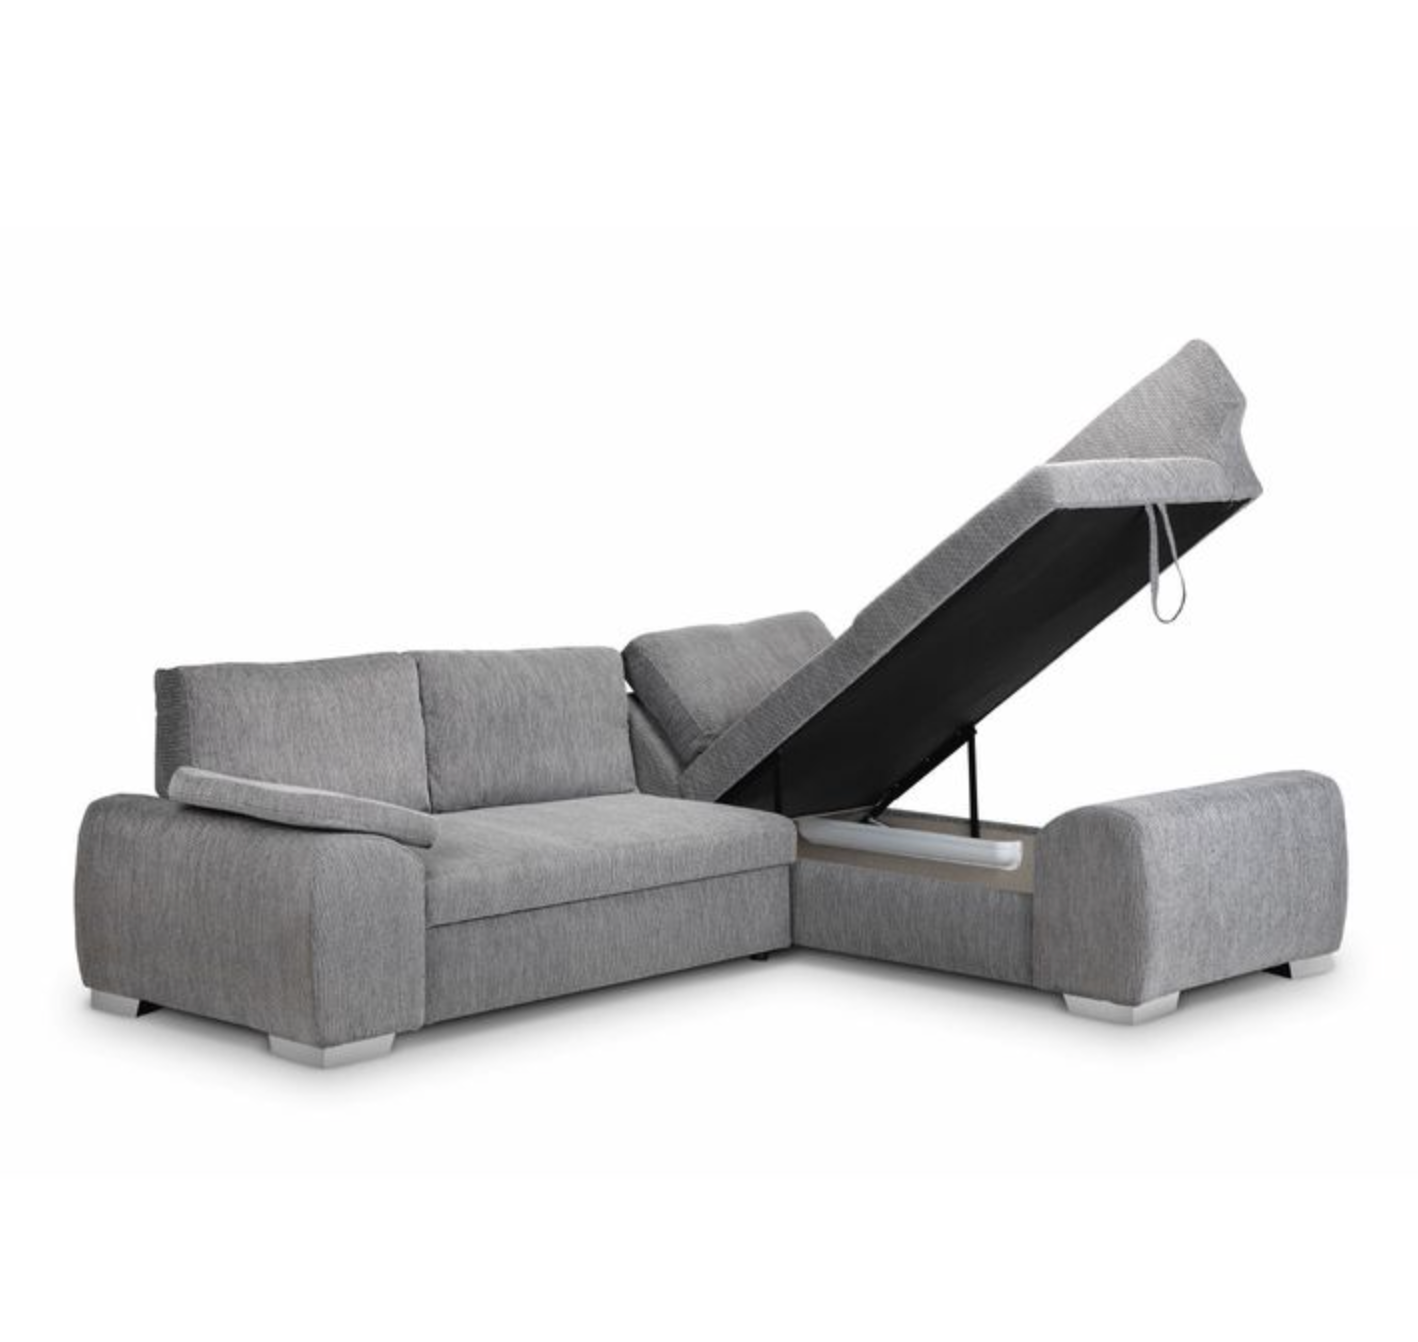 Sussex Right Hand Sofa Bed-Storage Grey Fabric